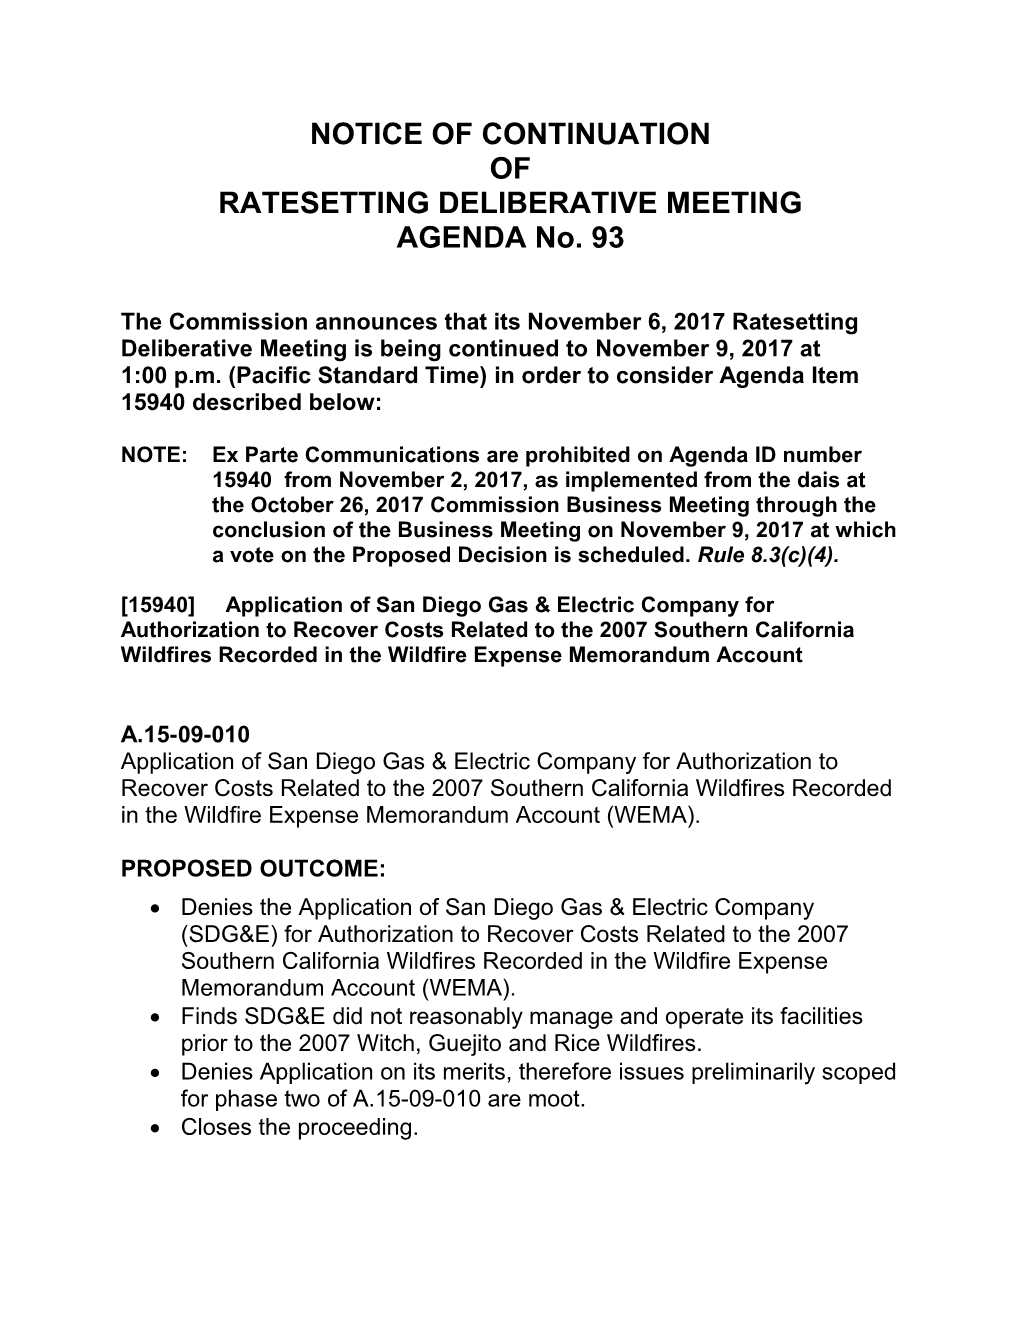 Notice of Continuation Meeting